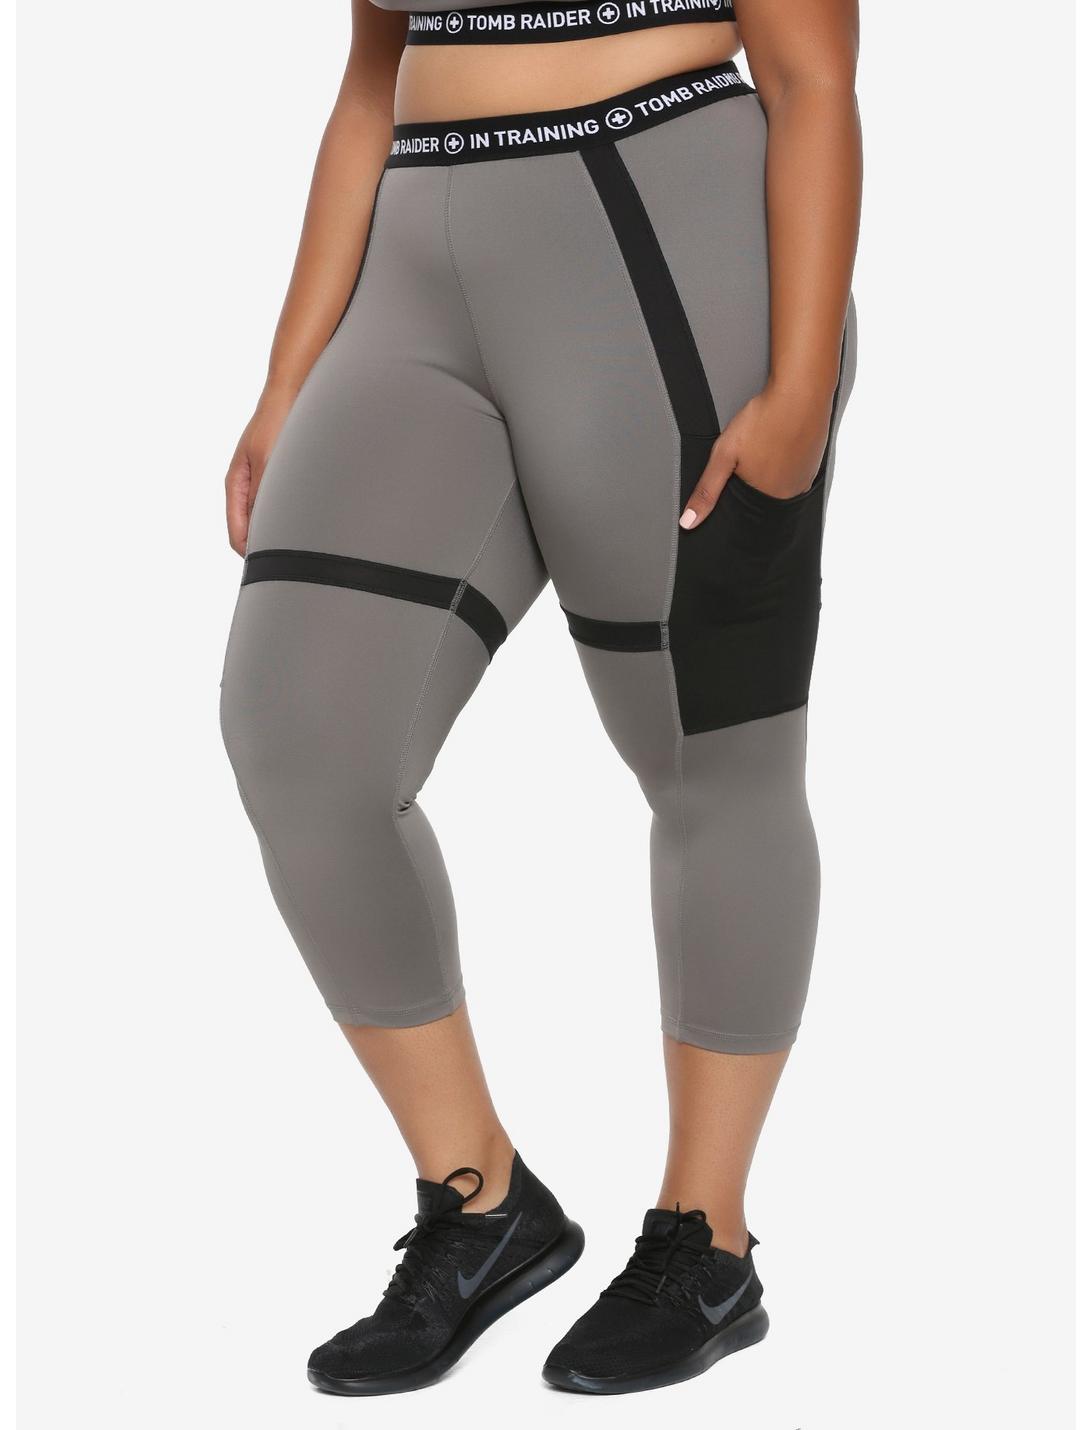 Her Universe Tomb Raider Shadow Of The Tomb Raider Girls Active Capris Plus Size, GREY, hi-res